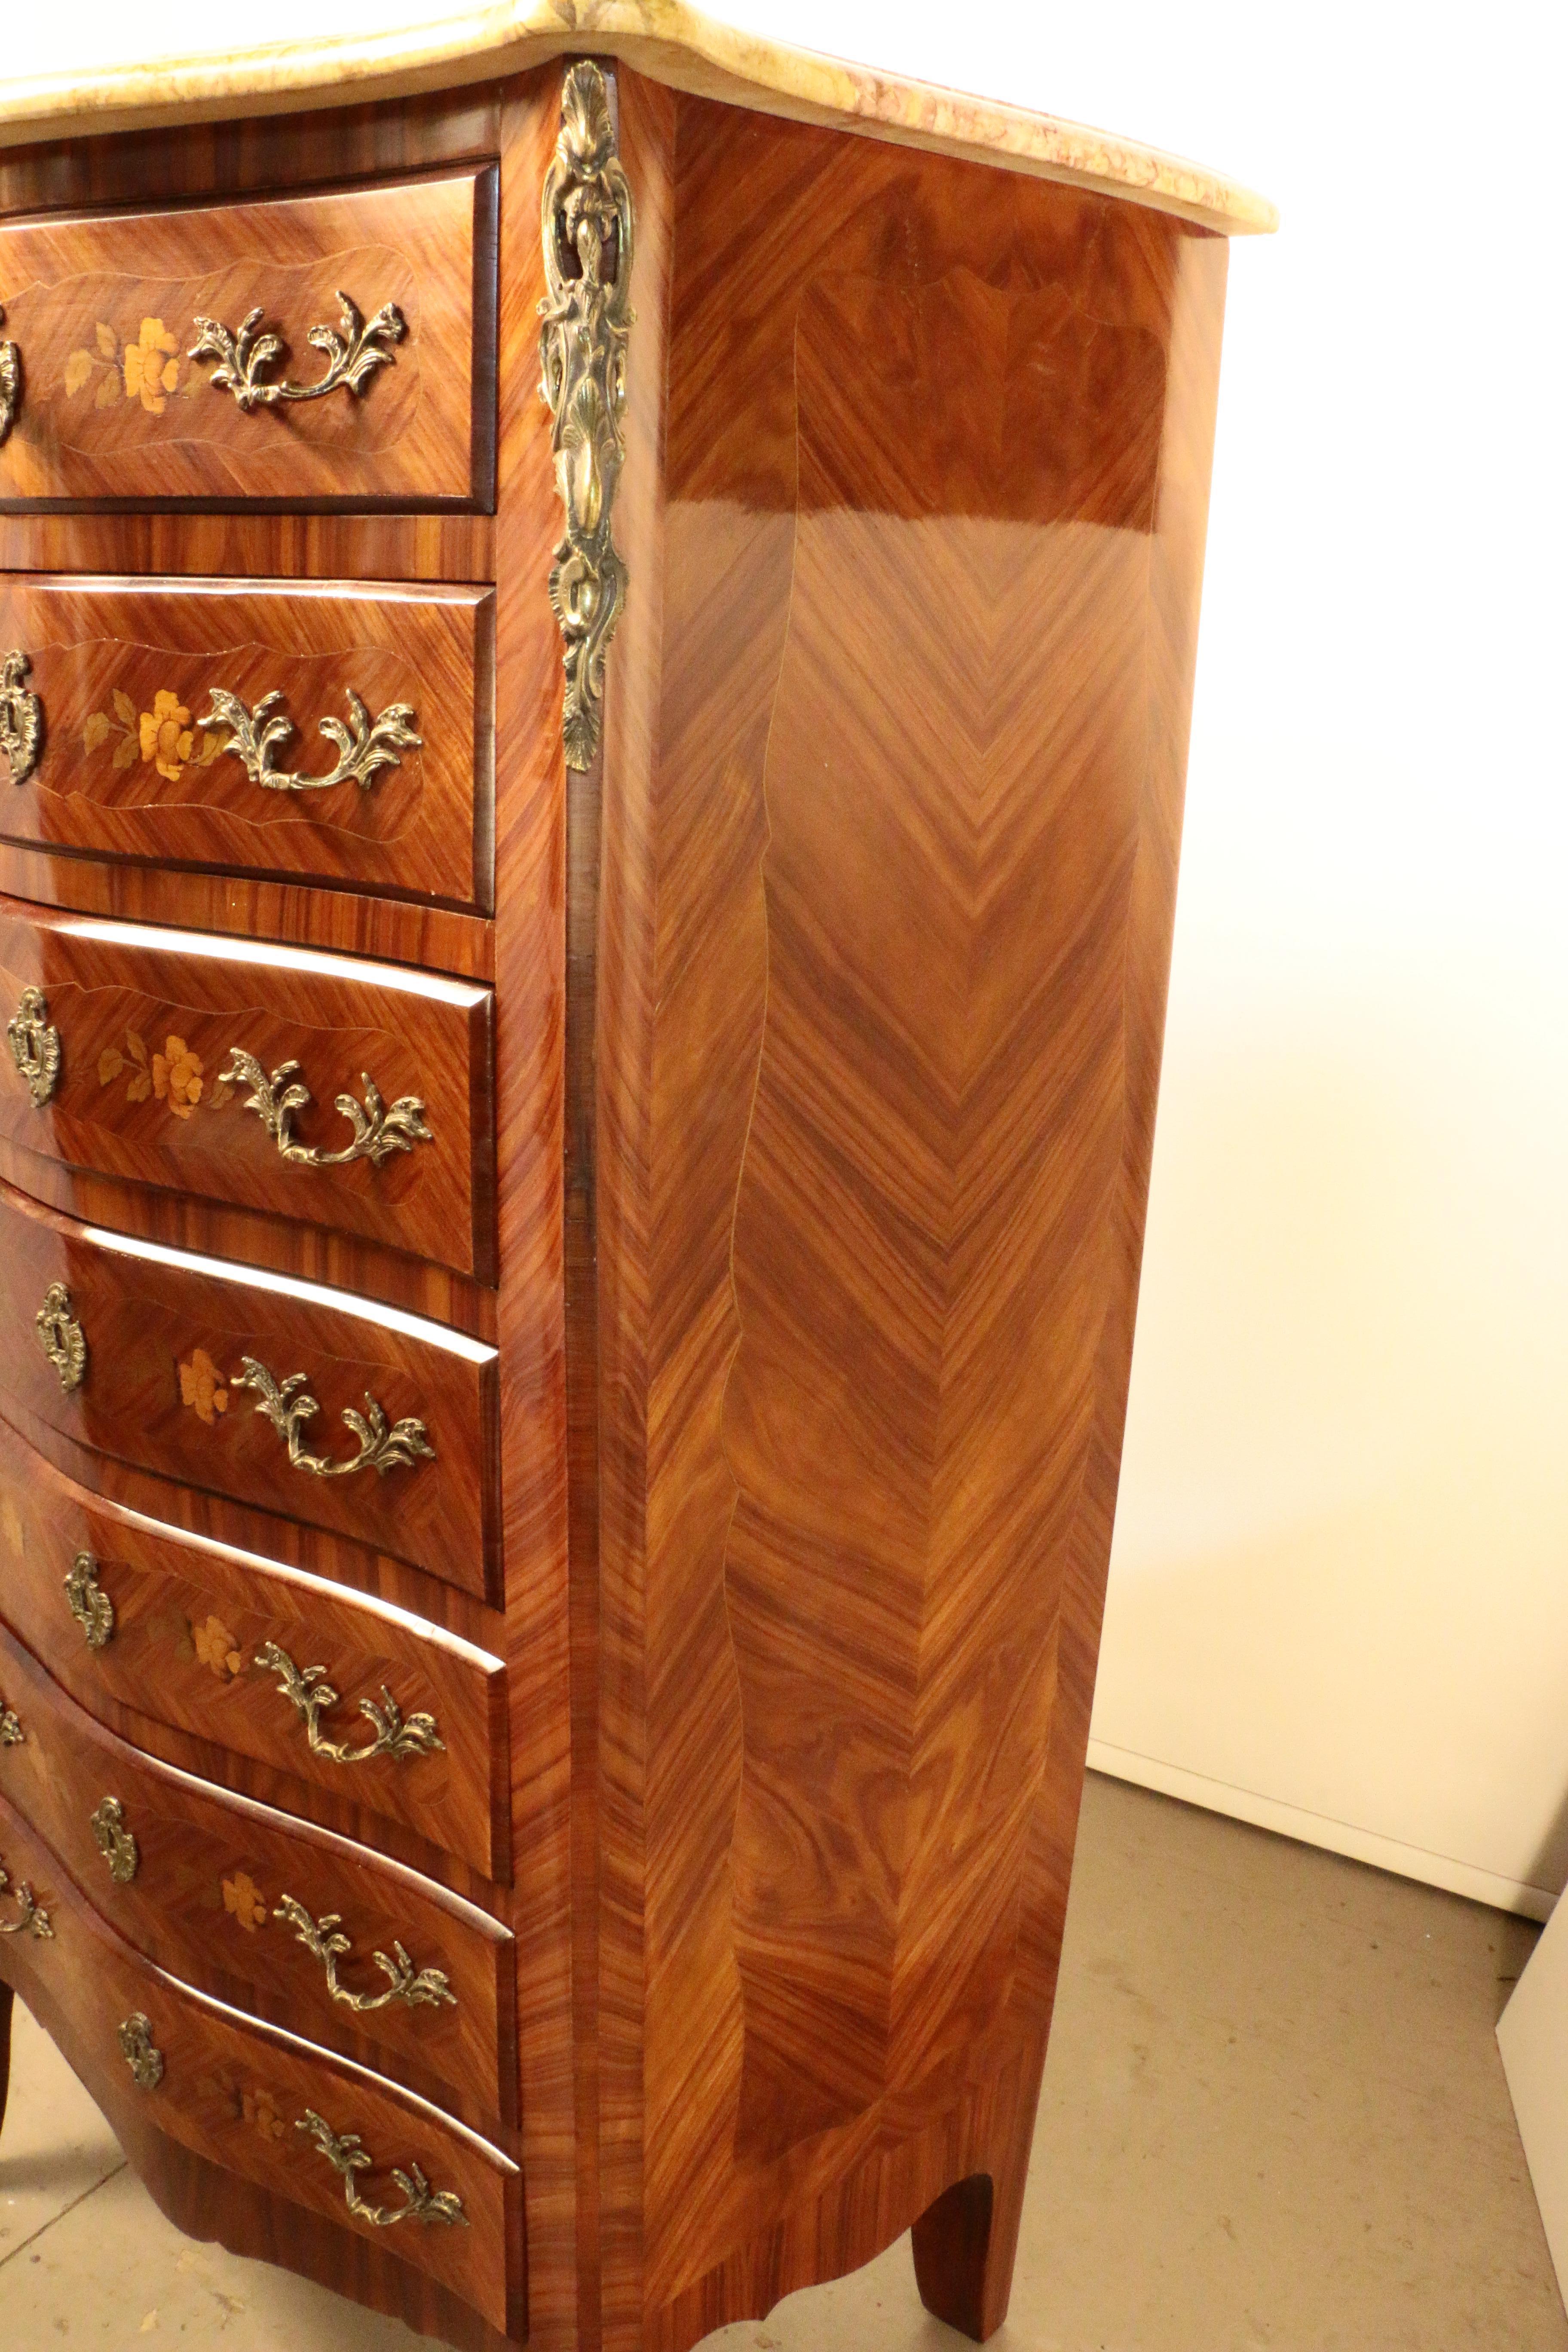 20th Century Seminaire, Tallboy Louis XV Style in Marquetry Kingwood